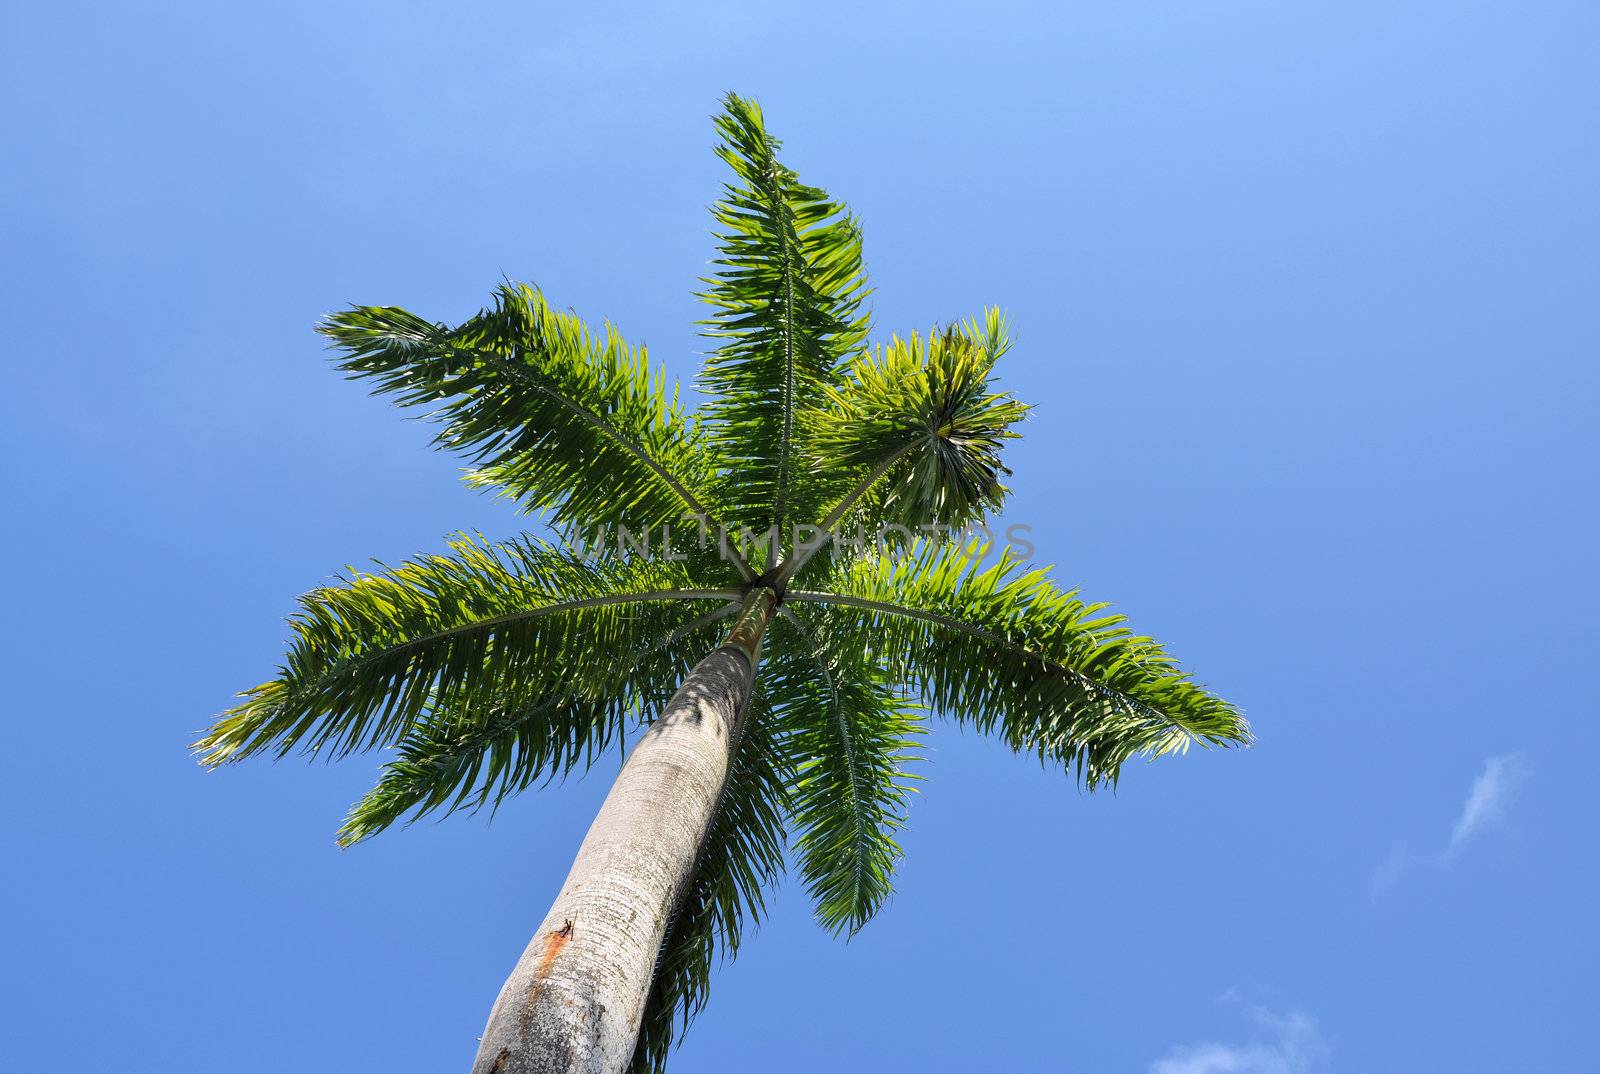 Palm tree seen from below looking up at the leaves